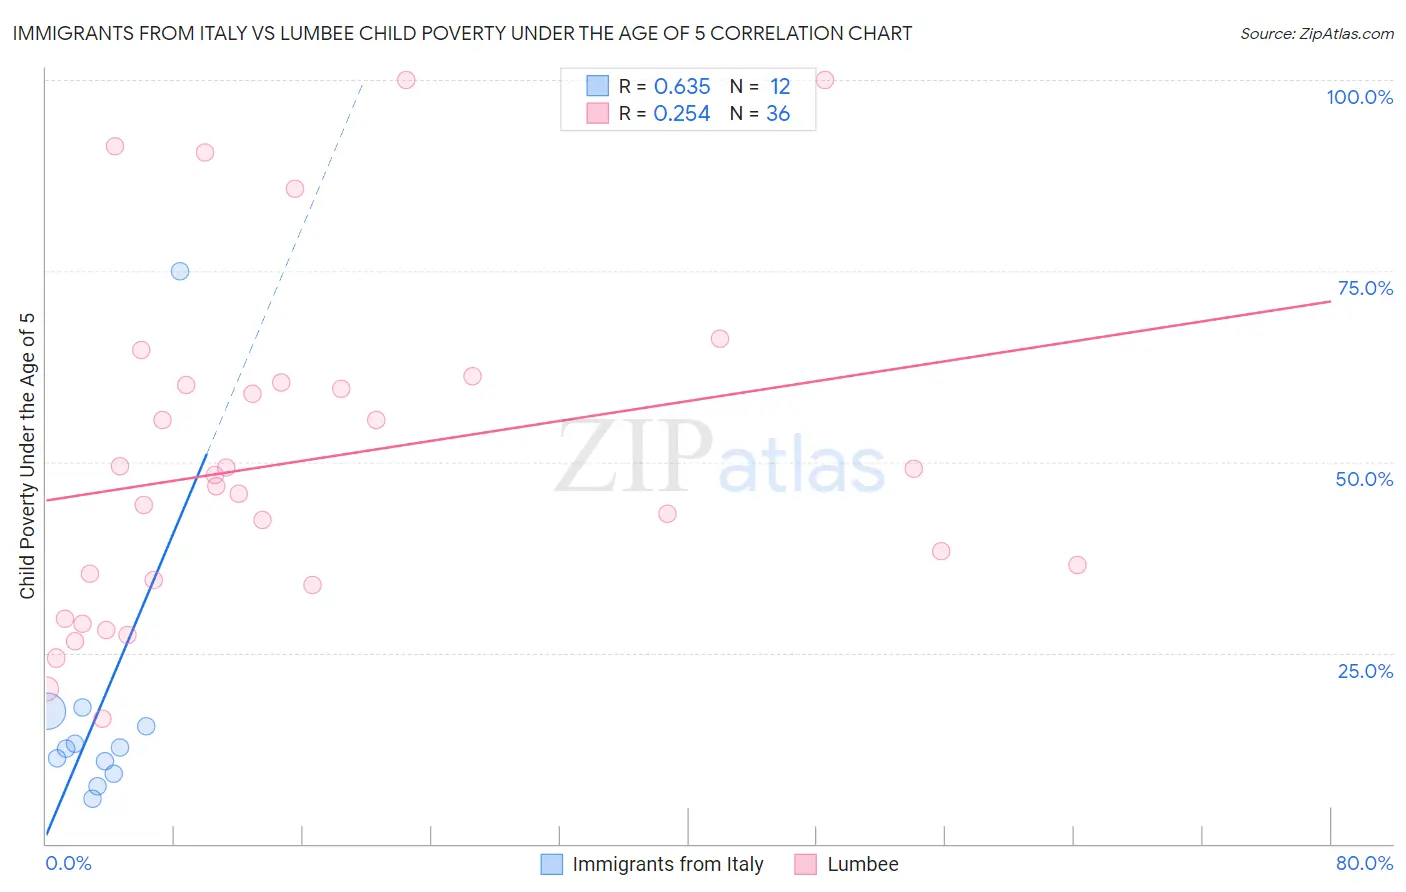 Immigrants from Italy vs Lumbee Child Poverty Under the Age of 5